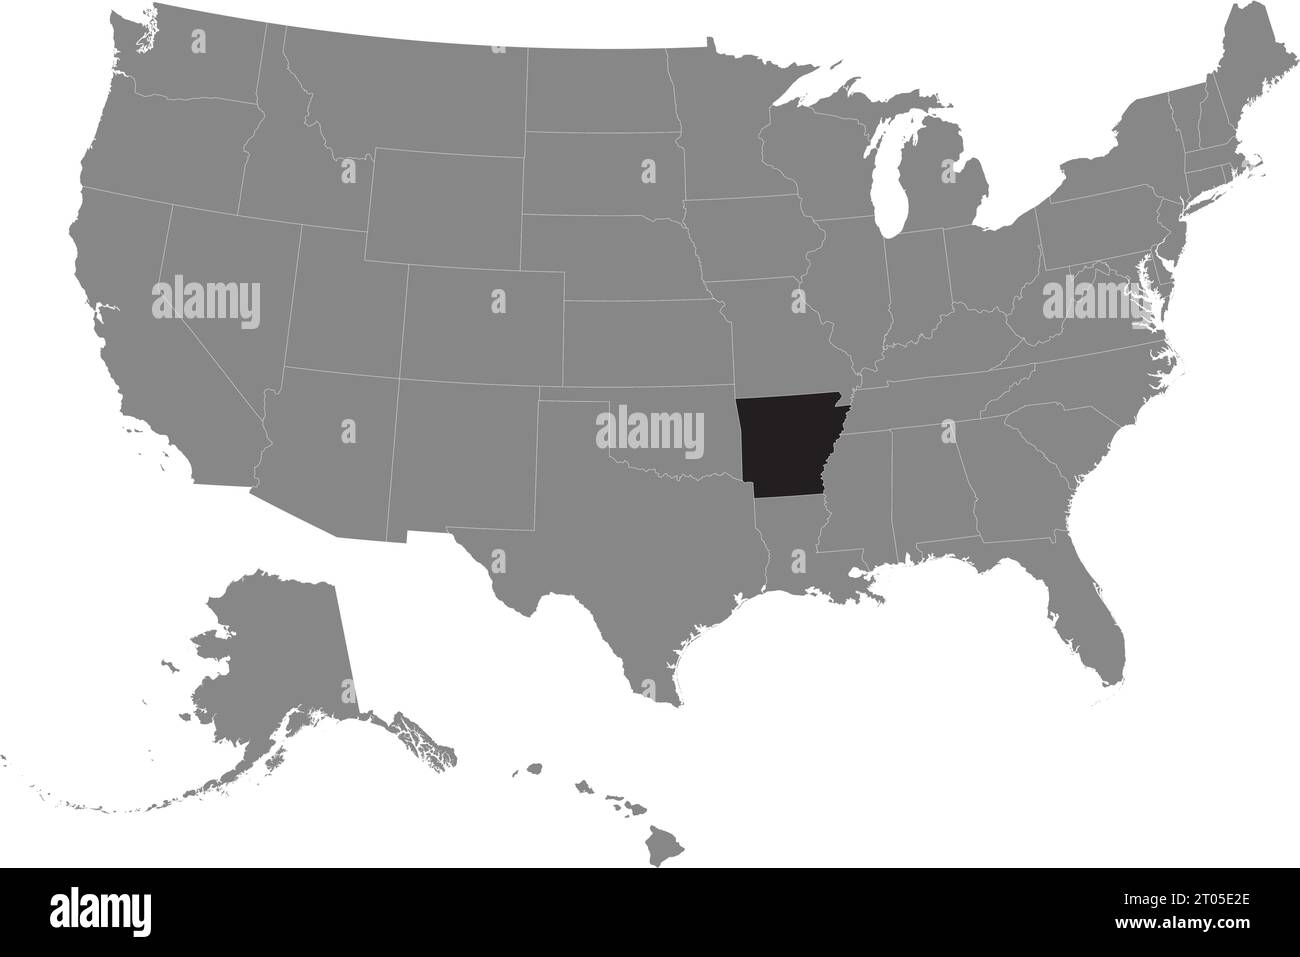 Black CMYK federal map of ARKANSAS inside detailed gray blank political map of the United States of America on transparent background Stock Vector